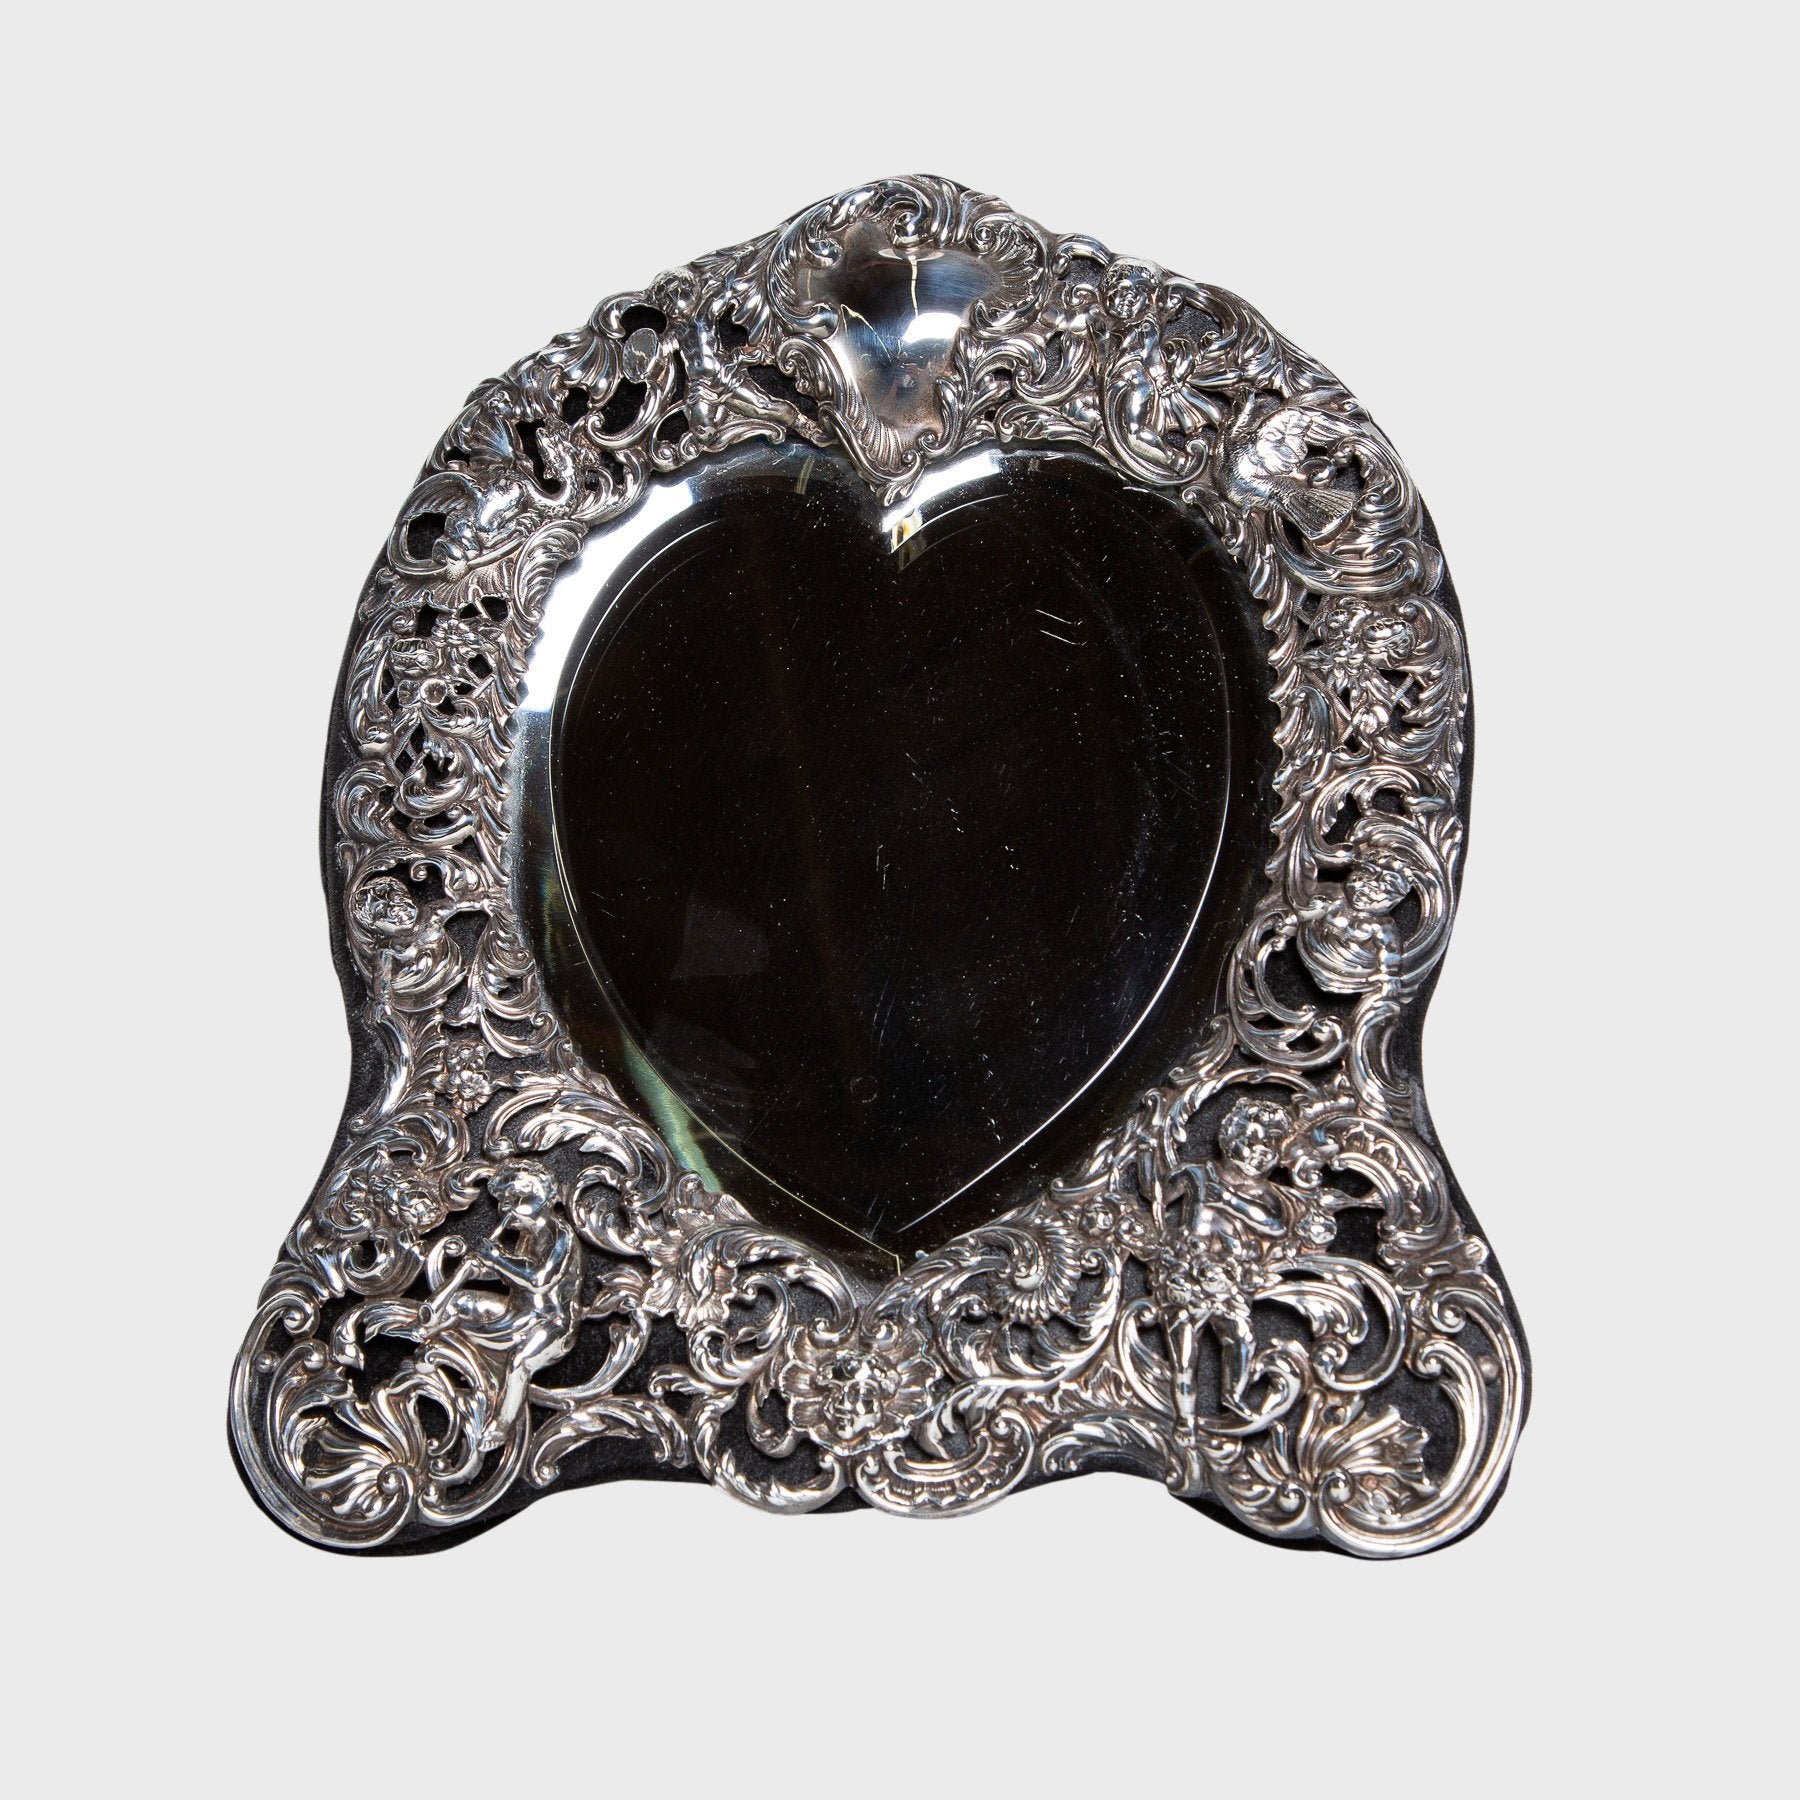 MAXFIELD PRIVATE COLLECTION | 1890 HEART PICTURE FRAME